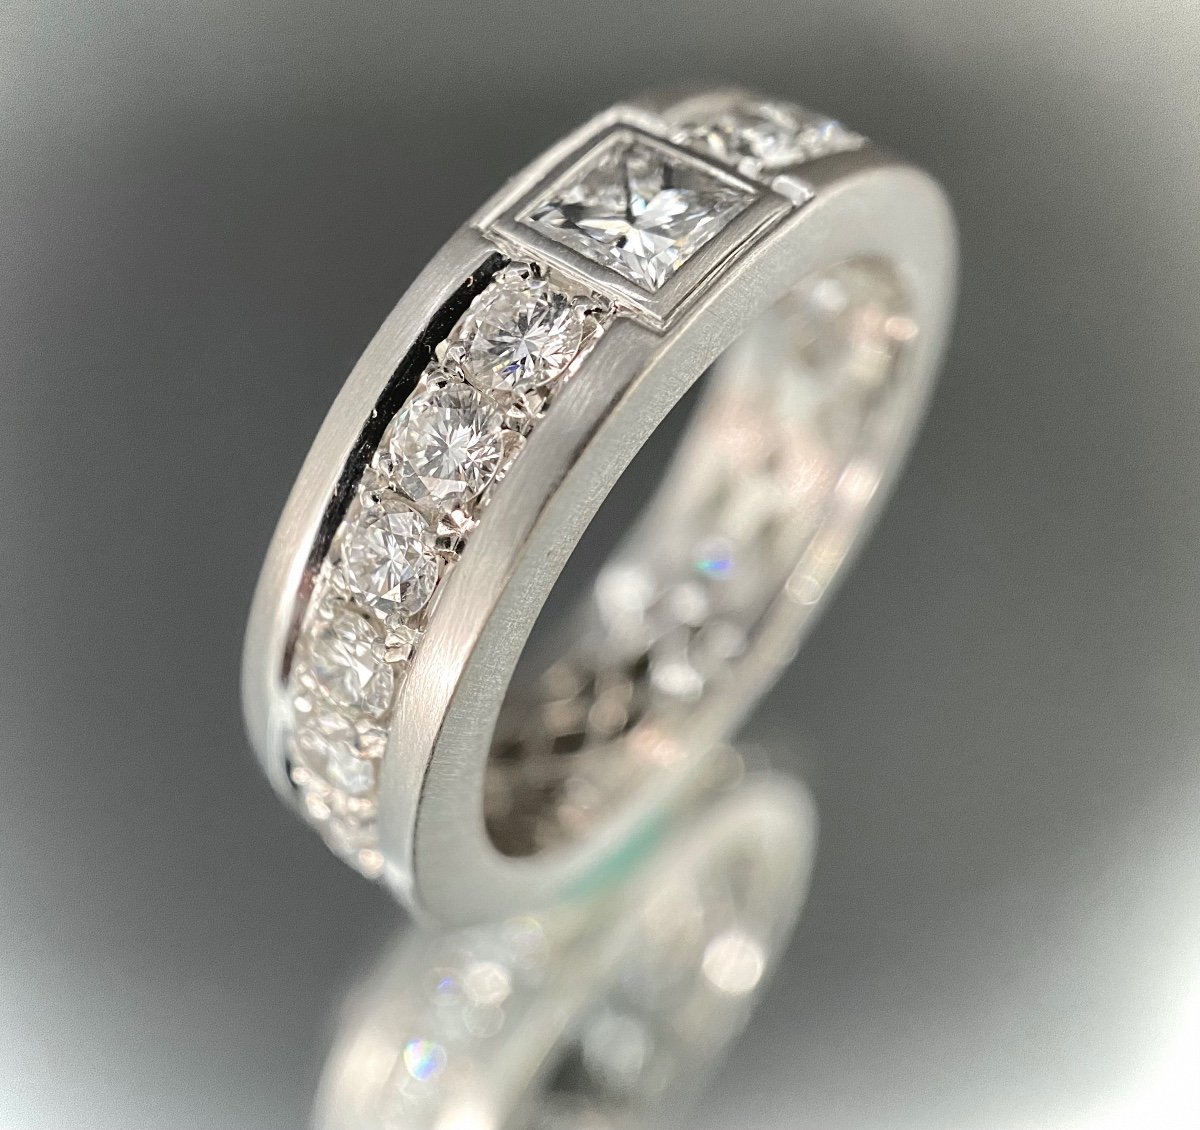 Alliance Ring In White Gold Set With A 0.75 Carat Princess Diamond + 3.6 Carats Of Brilliants-photo-1